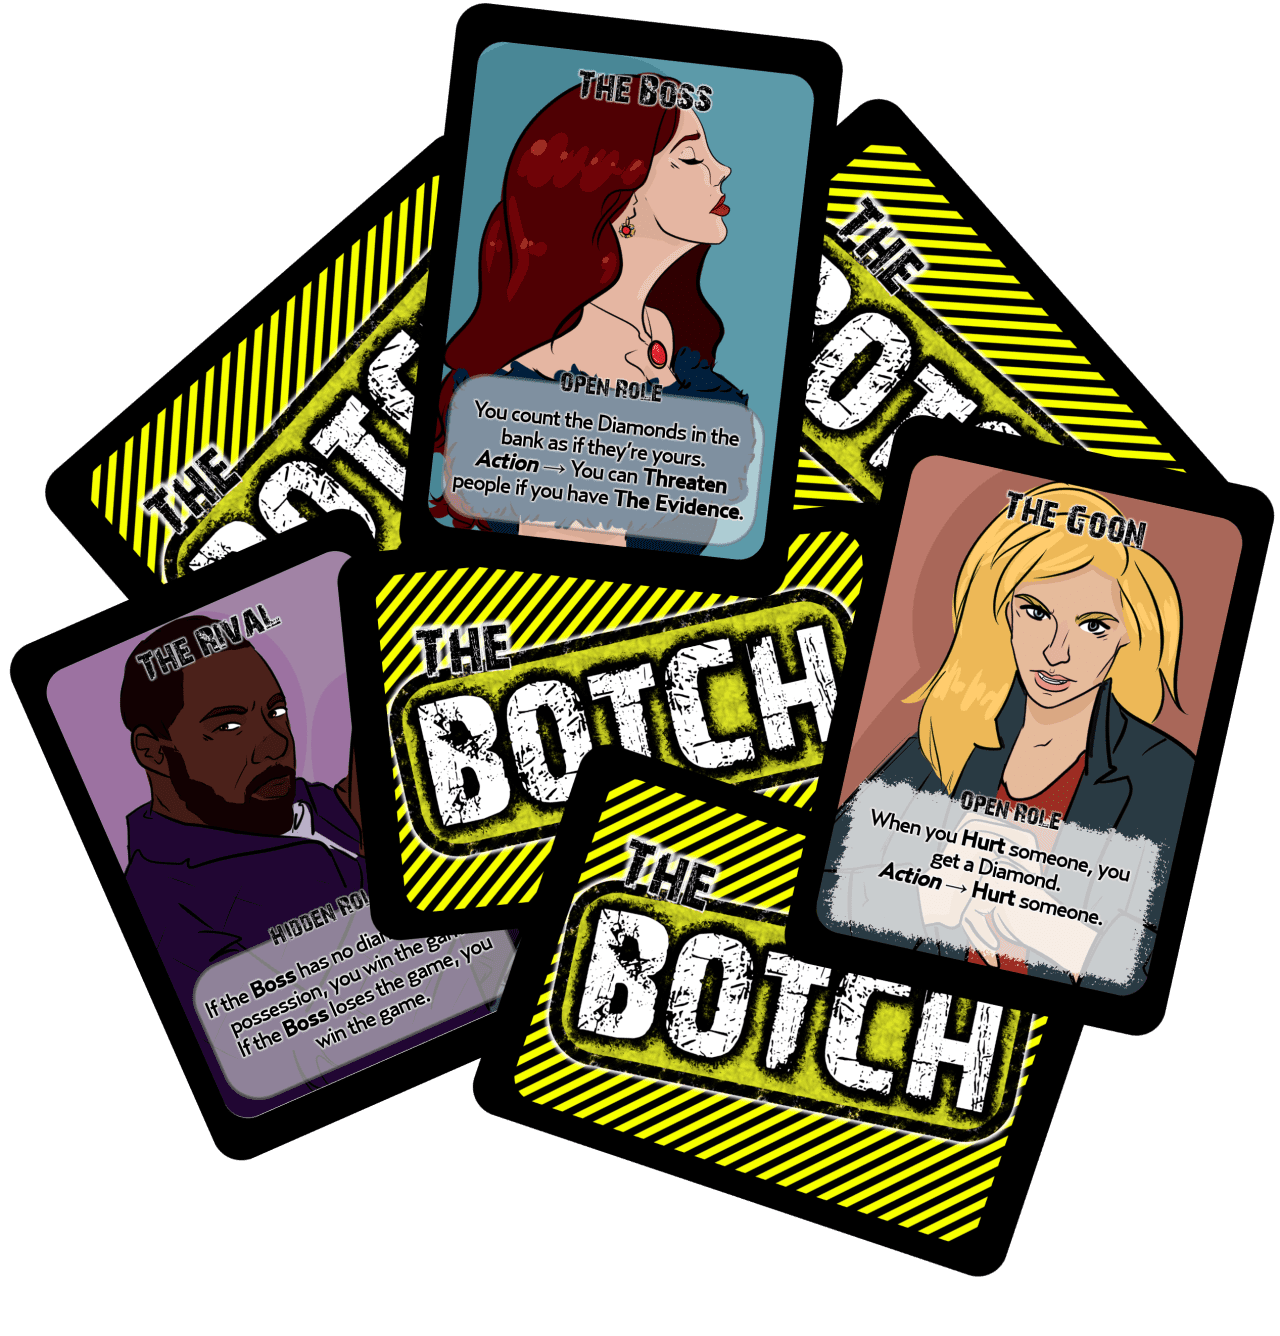 A mock-up image showing the fronts and backs of several Botch cards in a messy pile.